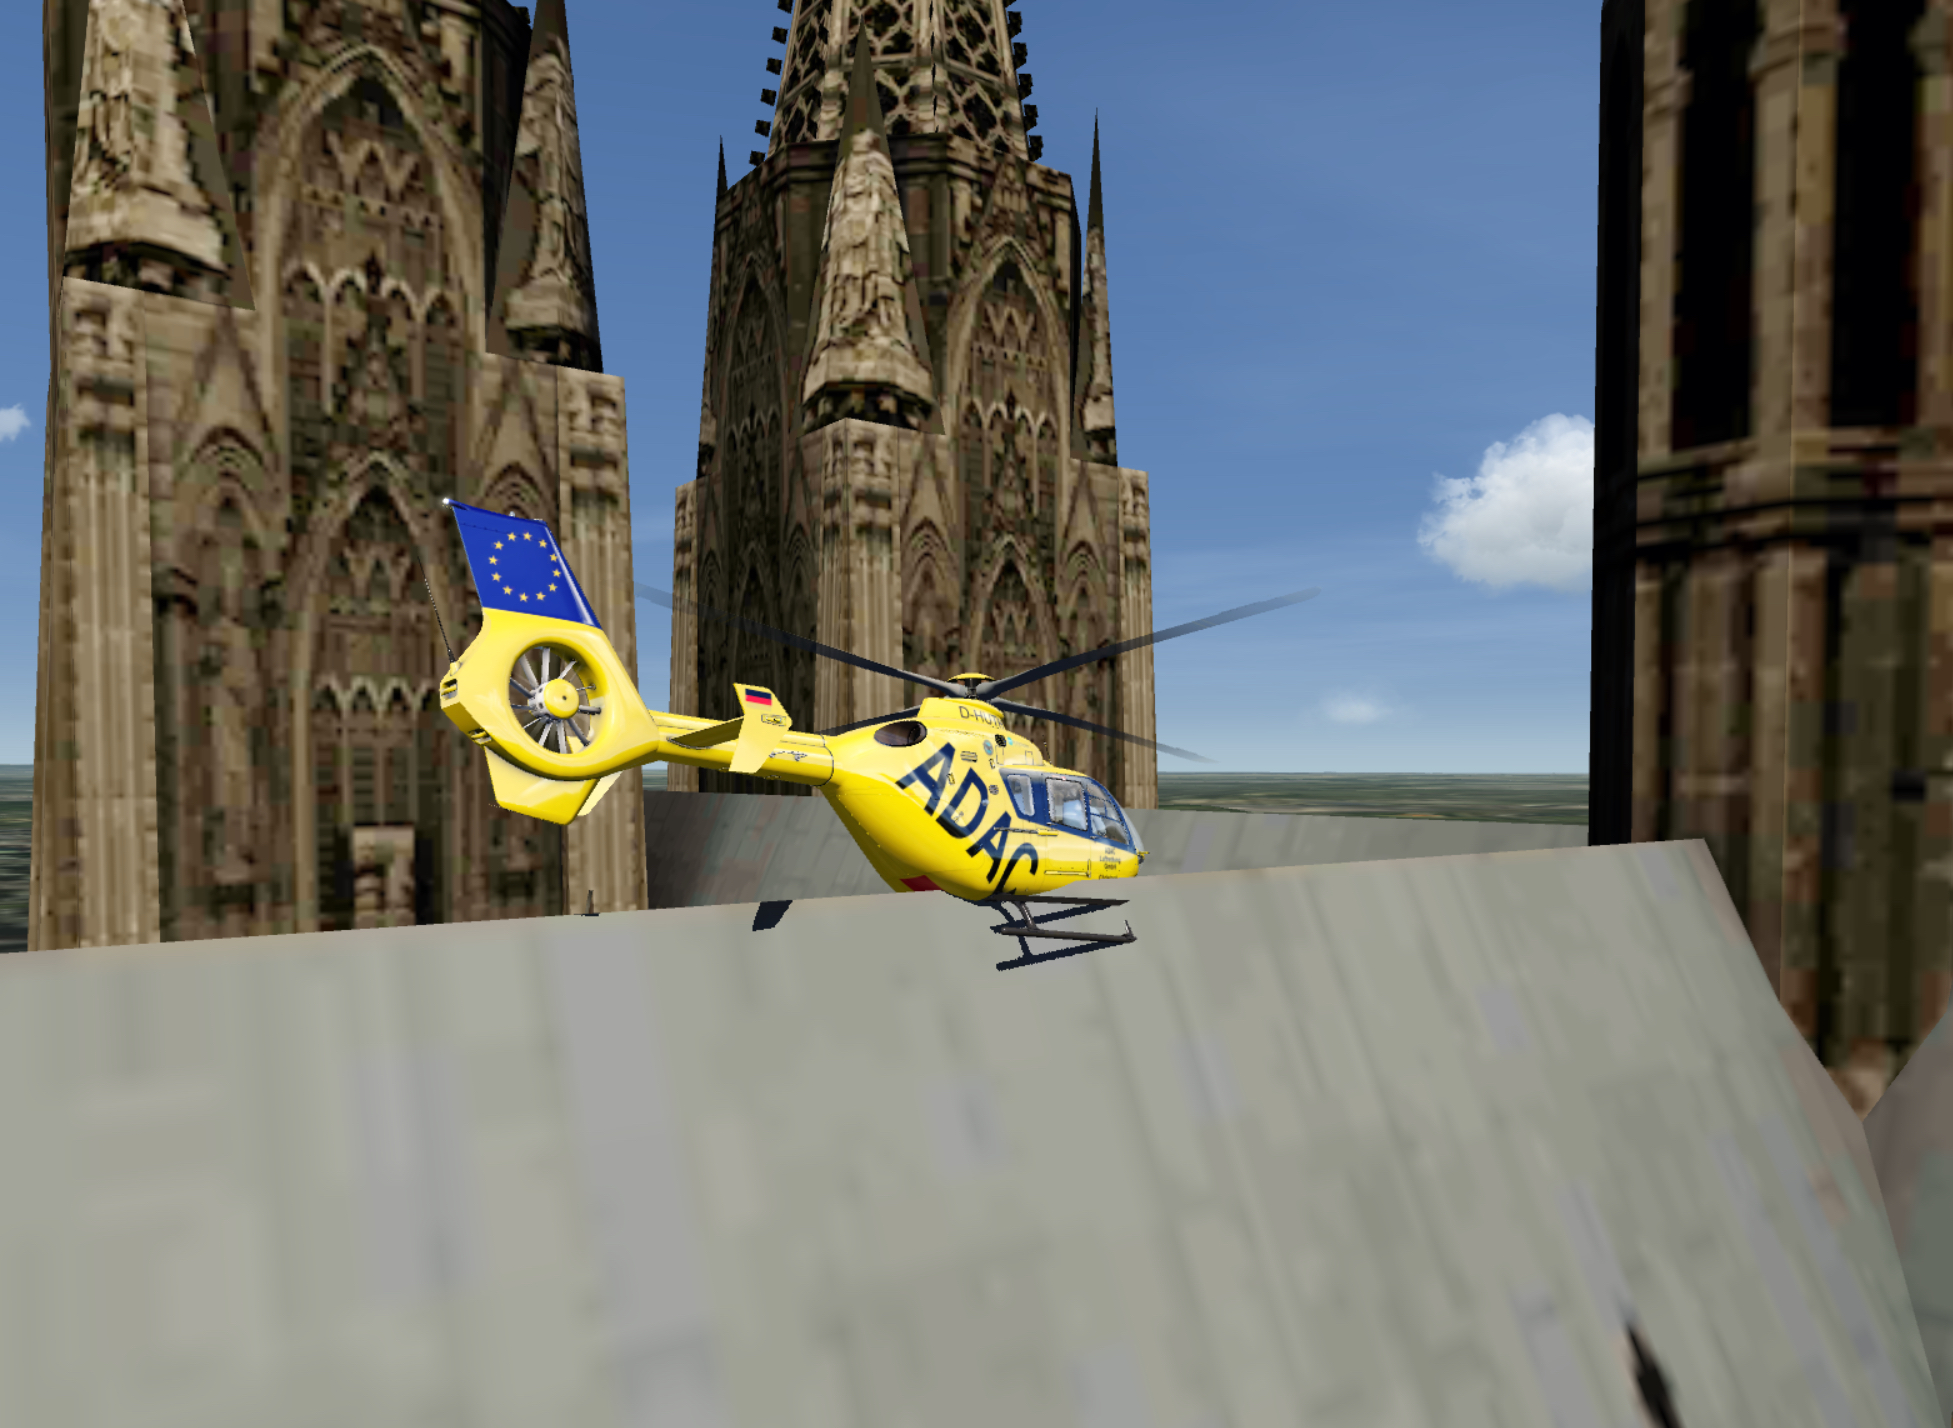 Landing attempt on the roof of Cologne Cathedral